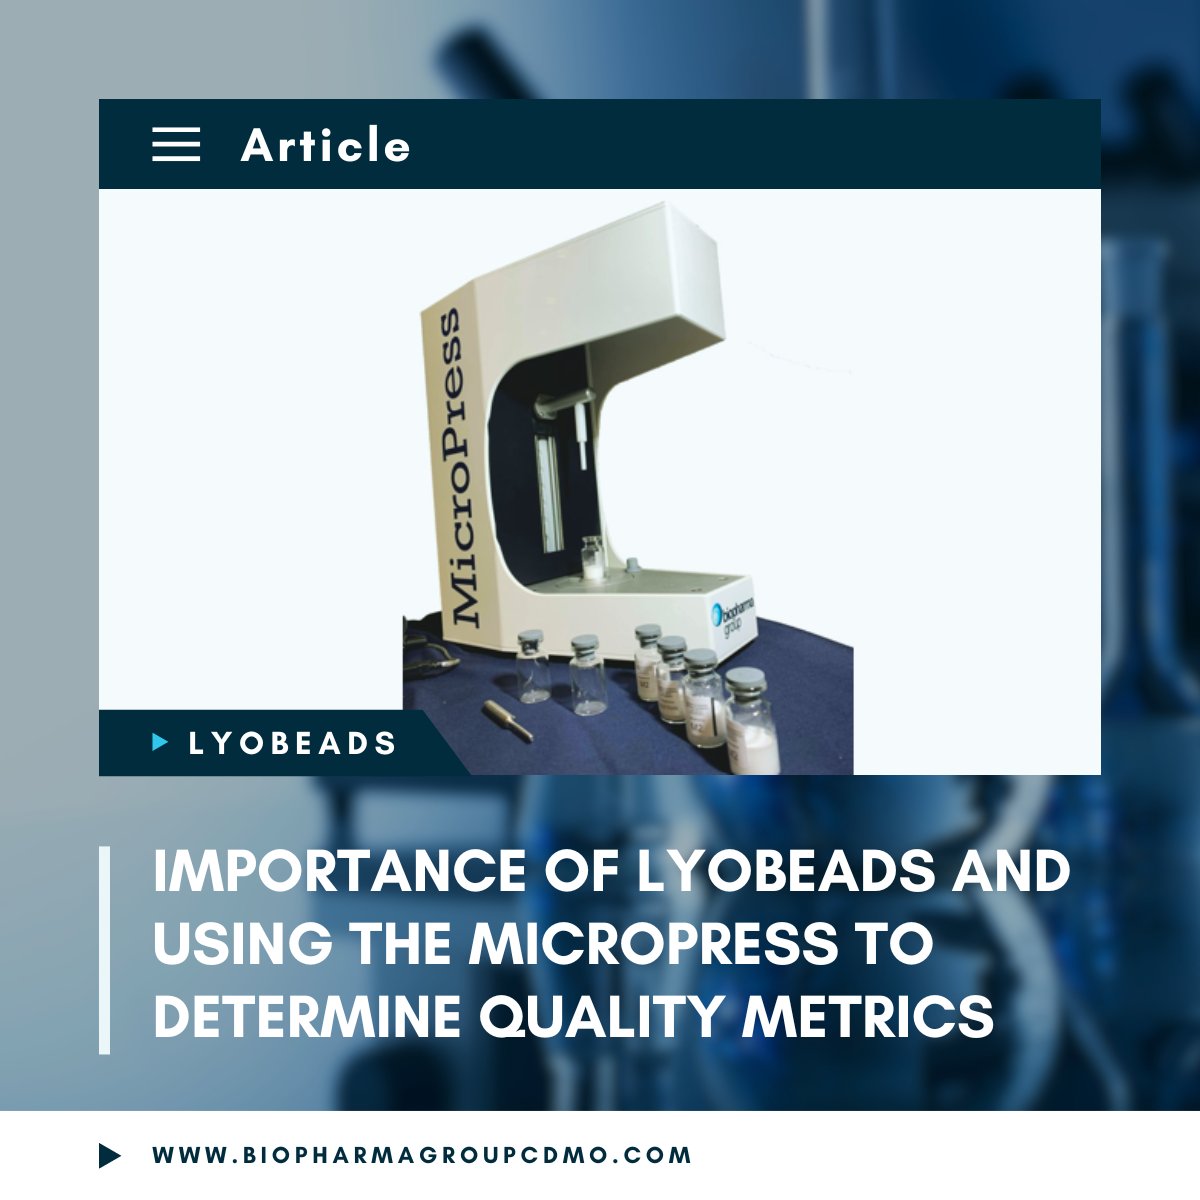 Check out Biopharma Group’s article on the importance of lyobeads and how Micropress analysis can help to determine critical quality metrics: bit.ly/4akTr2T

Alternatively, get in touch to discuss our analytical instrument range in more detail: bit.ly/3H9yivP